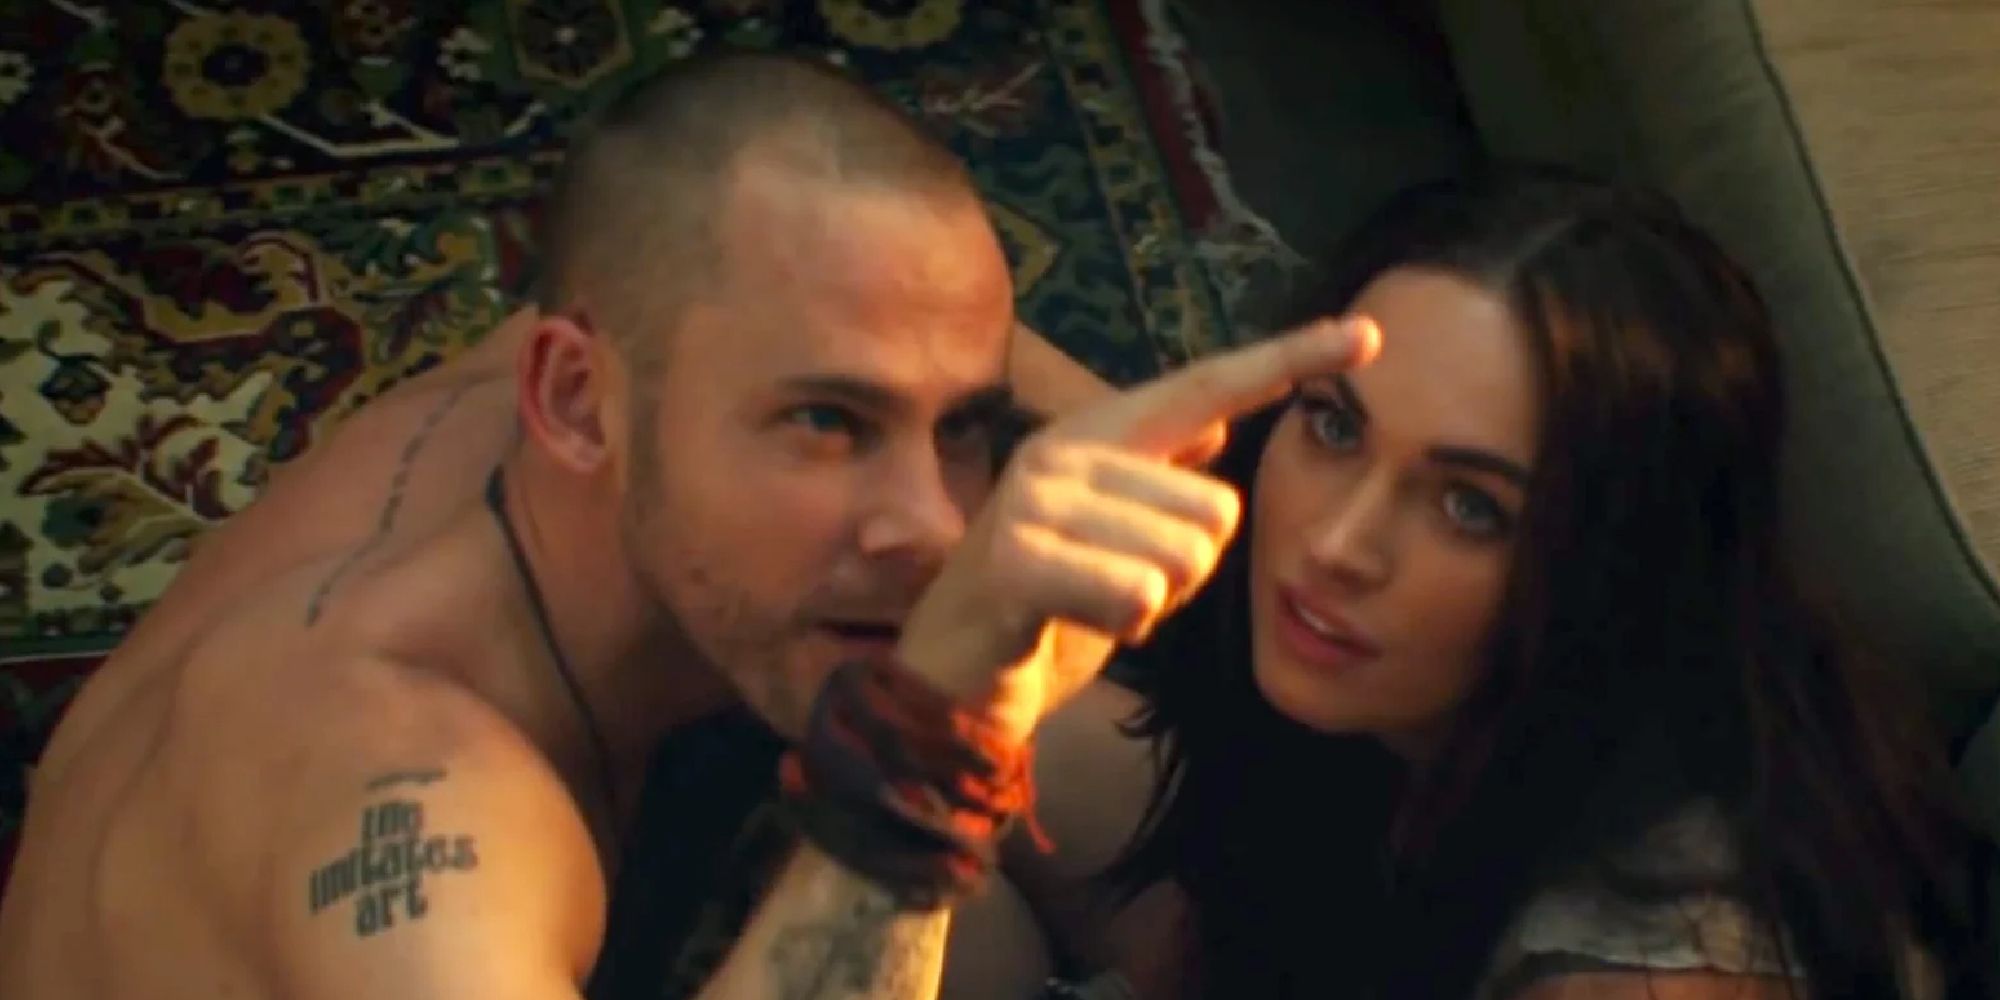 Dominic Monaghan and Megan Fox as a couple in the Love The Way You Lie video